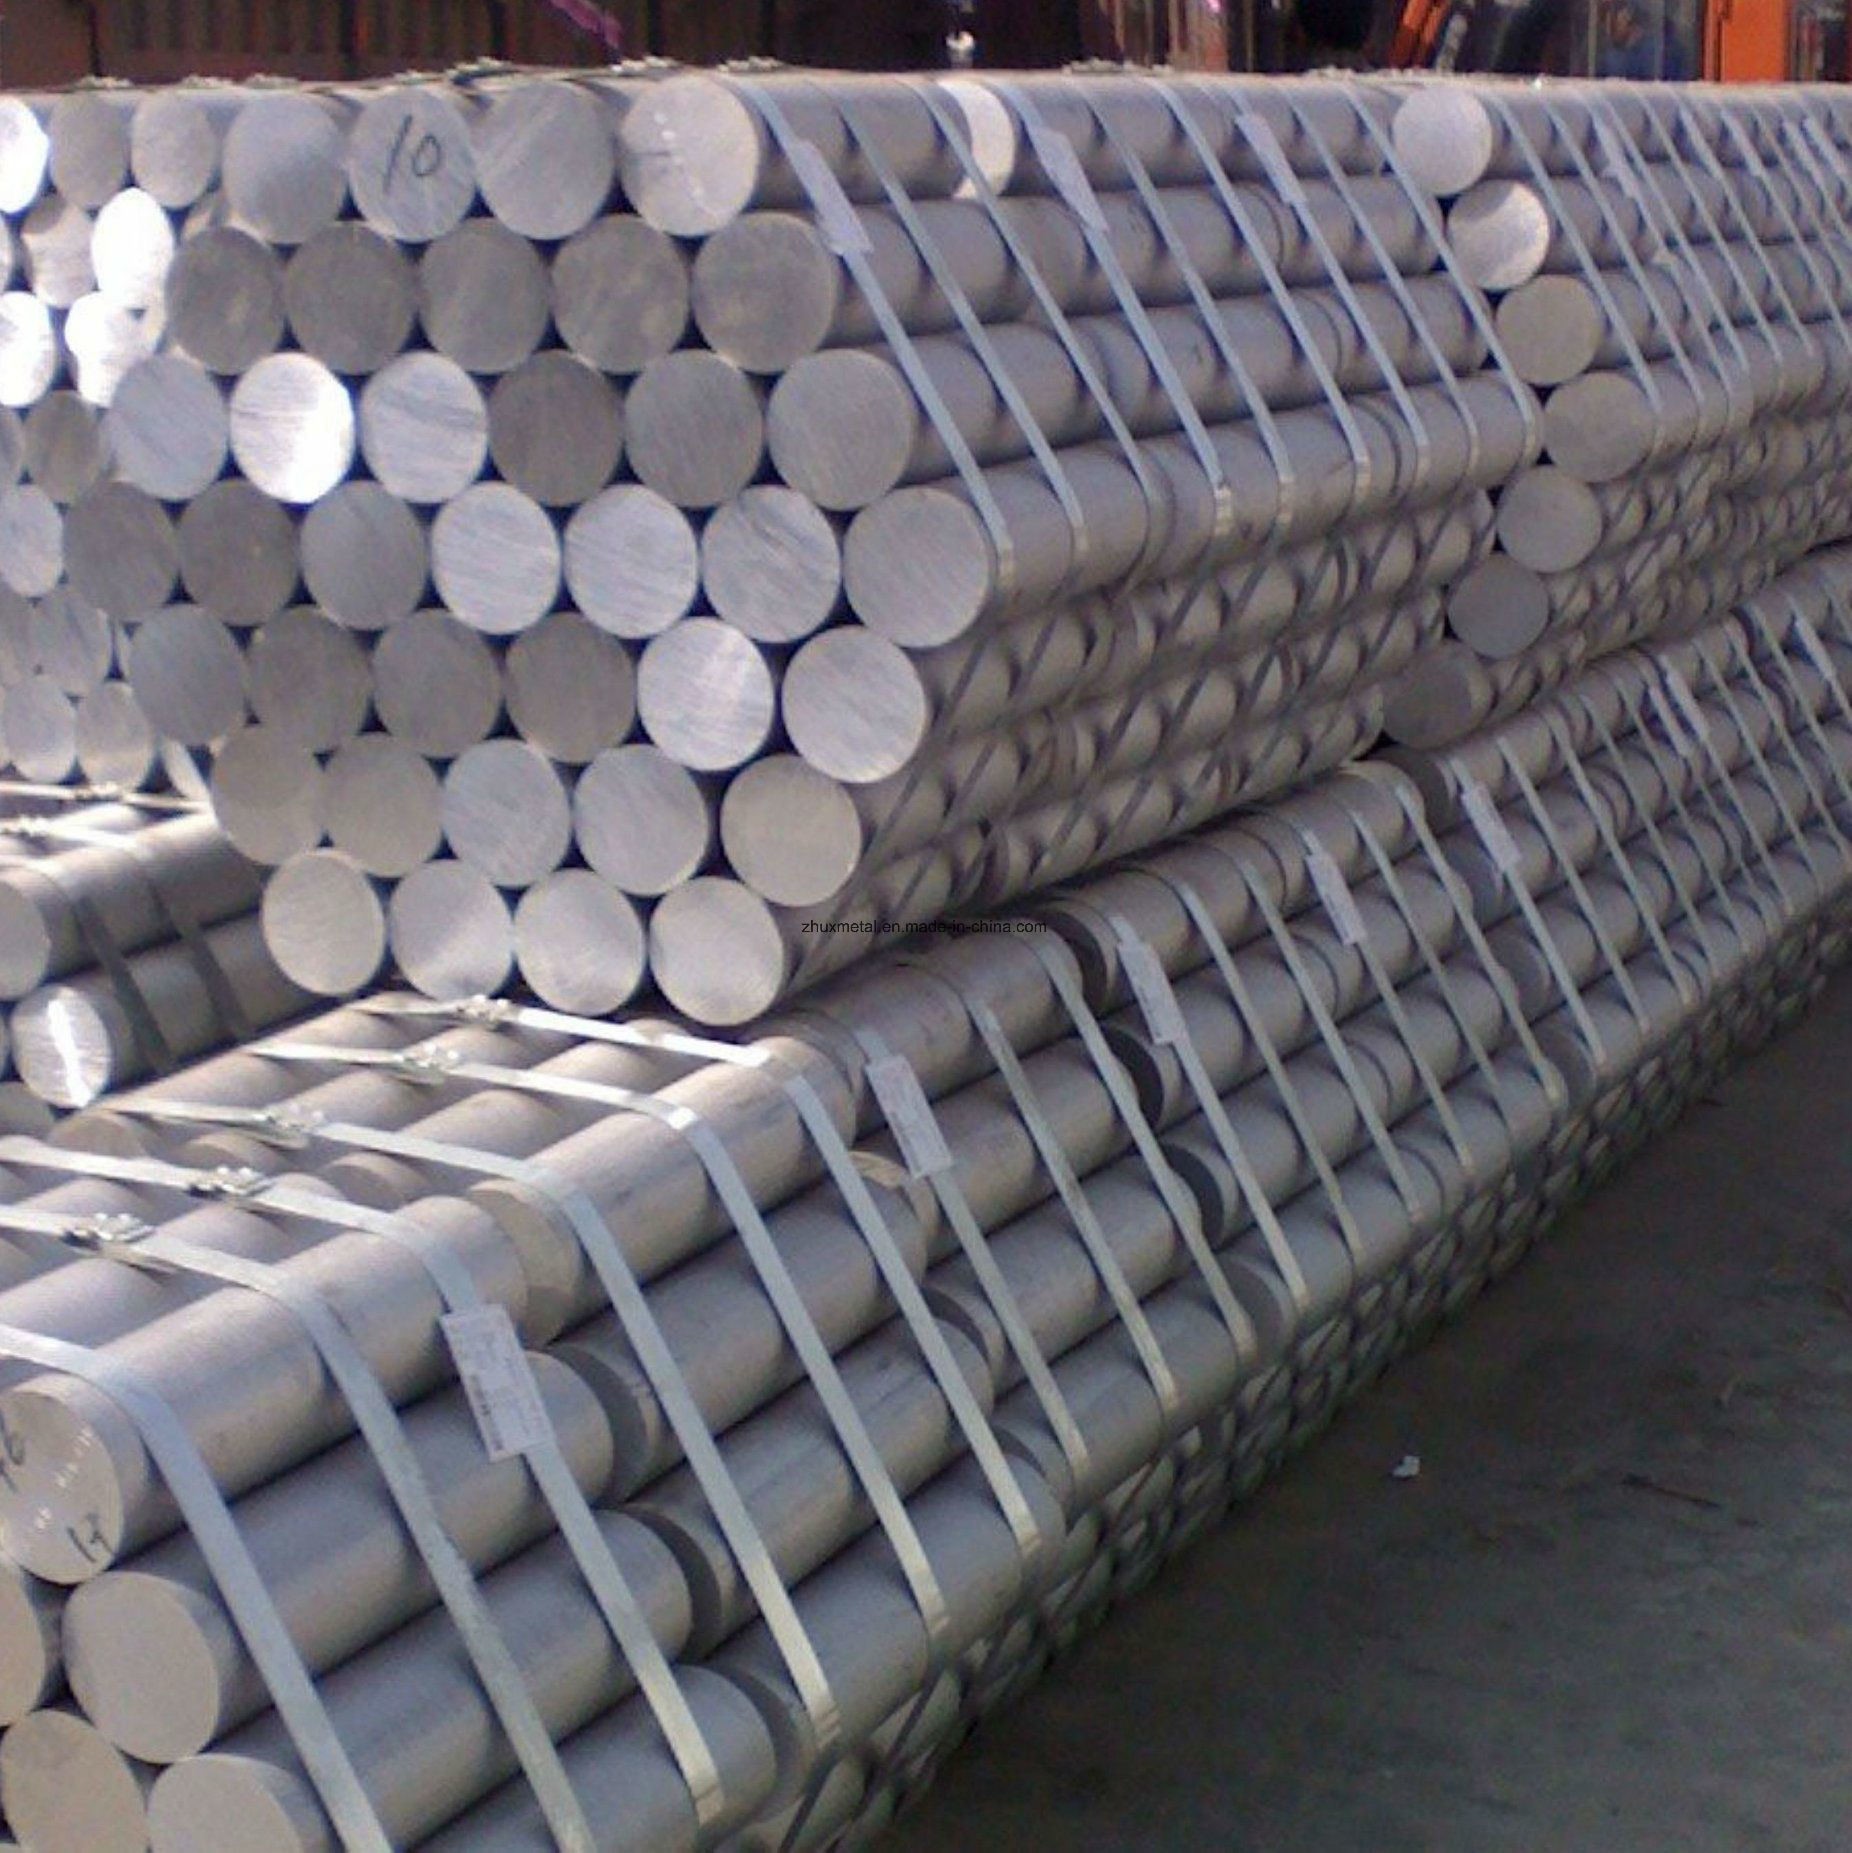 Vedanta continues to increase its aluminium product prices by INR3000/t in line with LME aluminium price rally